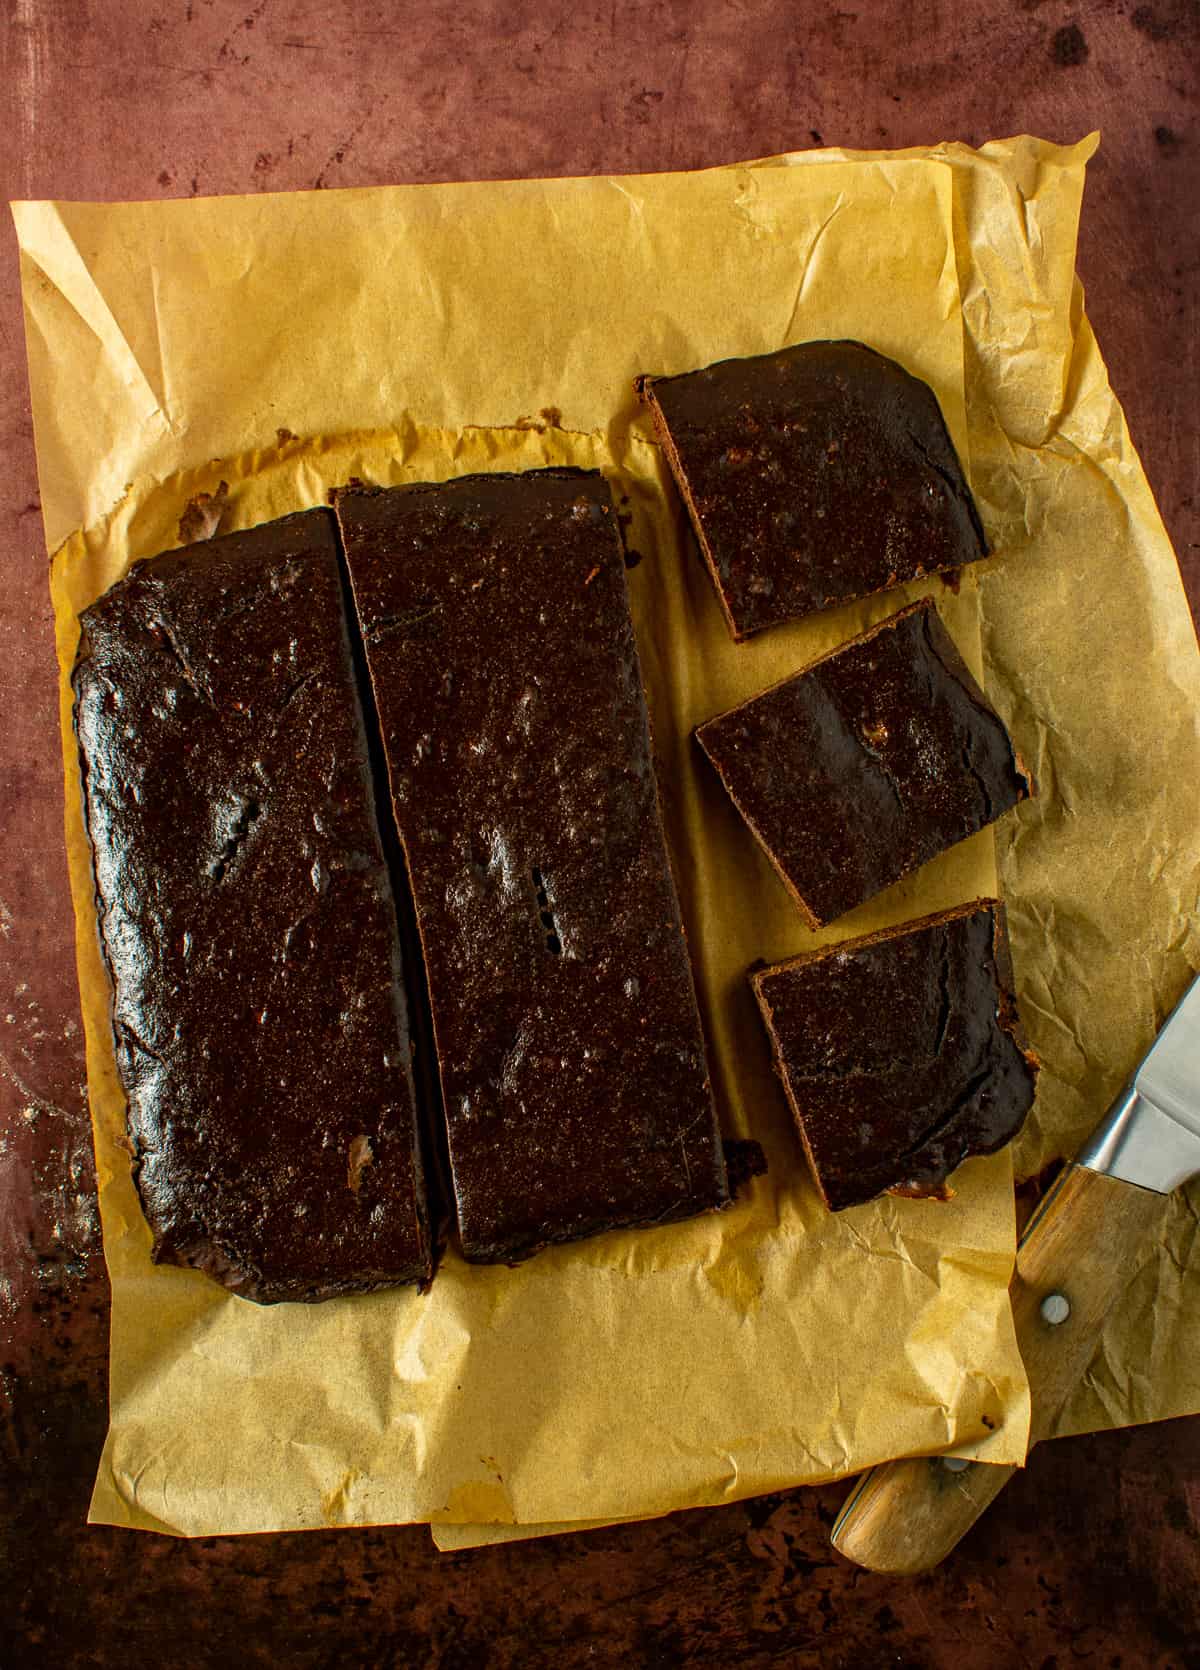 vegan brownies on parchment paper with knife.